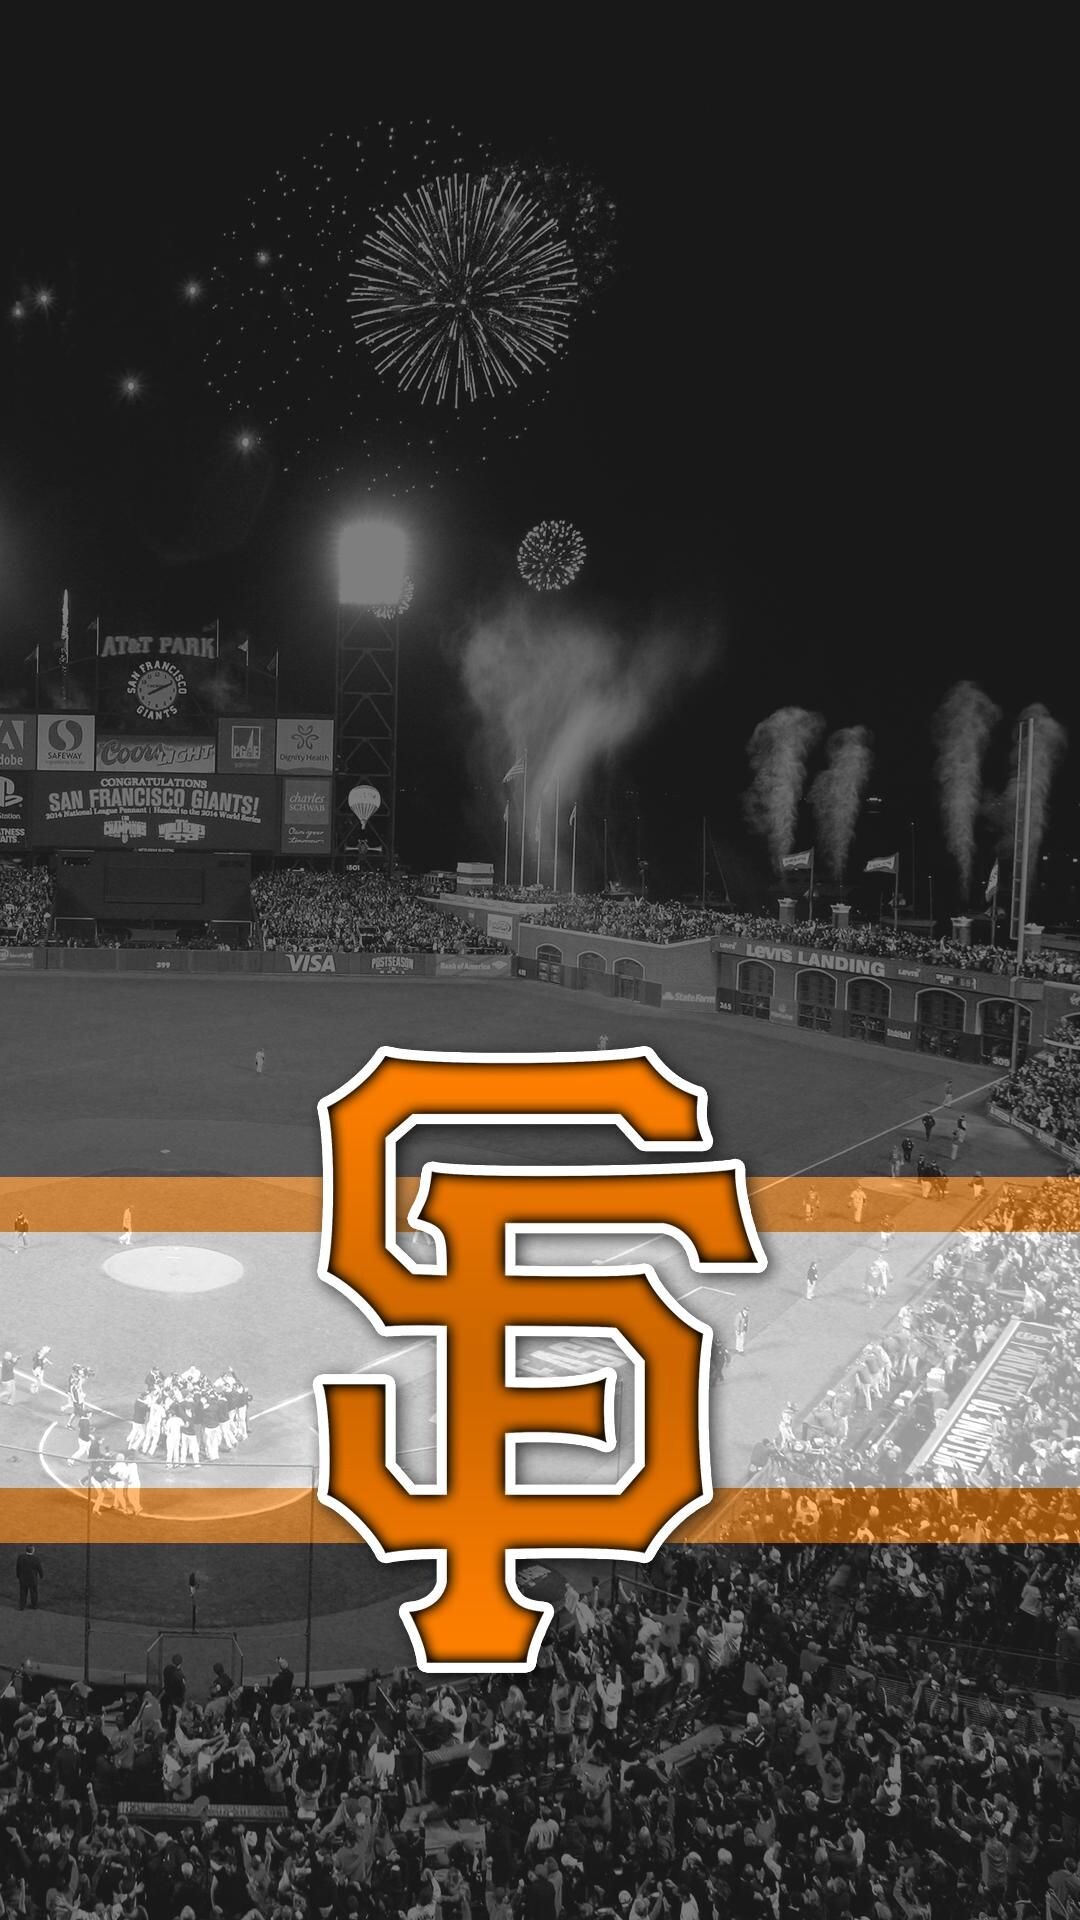 San Francisco Giants: The team won consecutive National League pennants in 1888 and 1889. 1080x1920 Full HD Wallpaper.